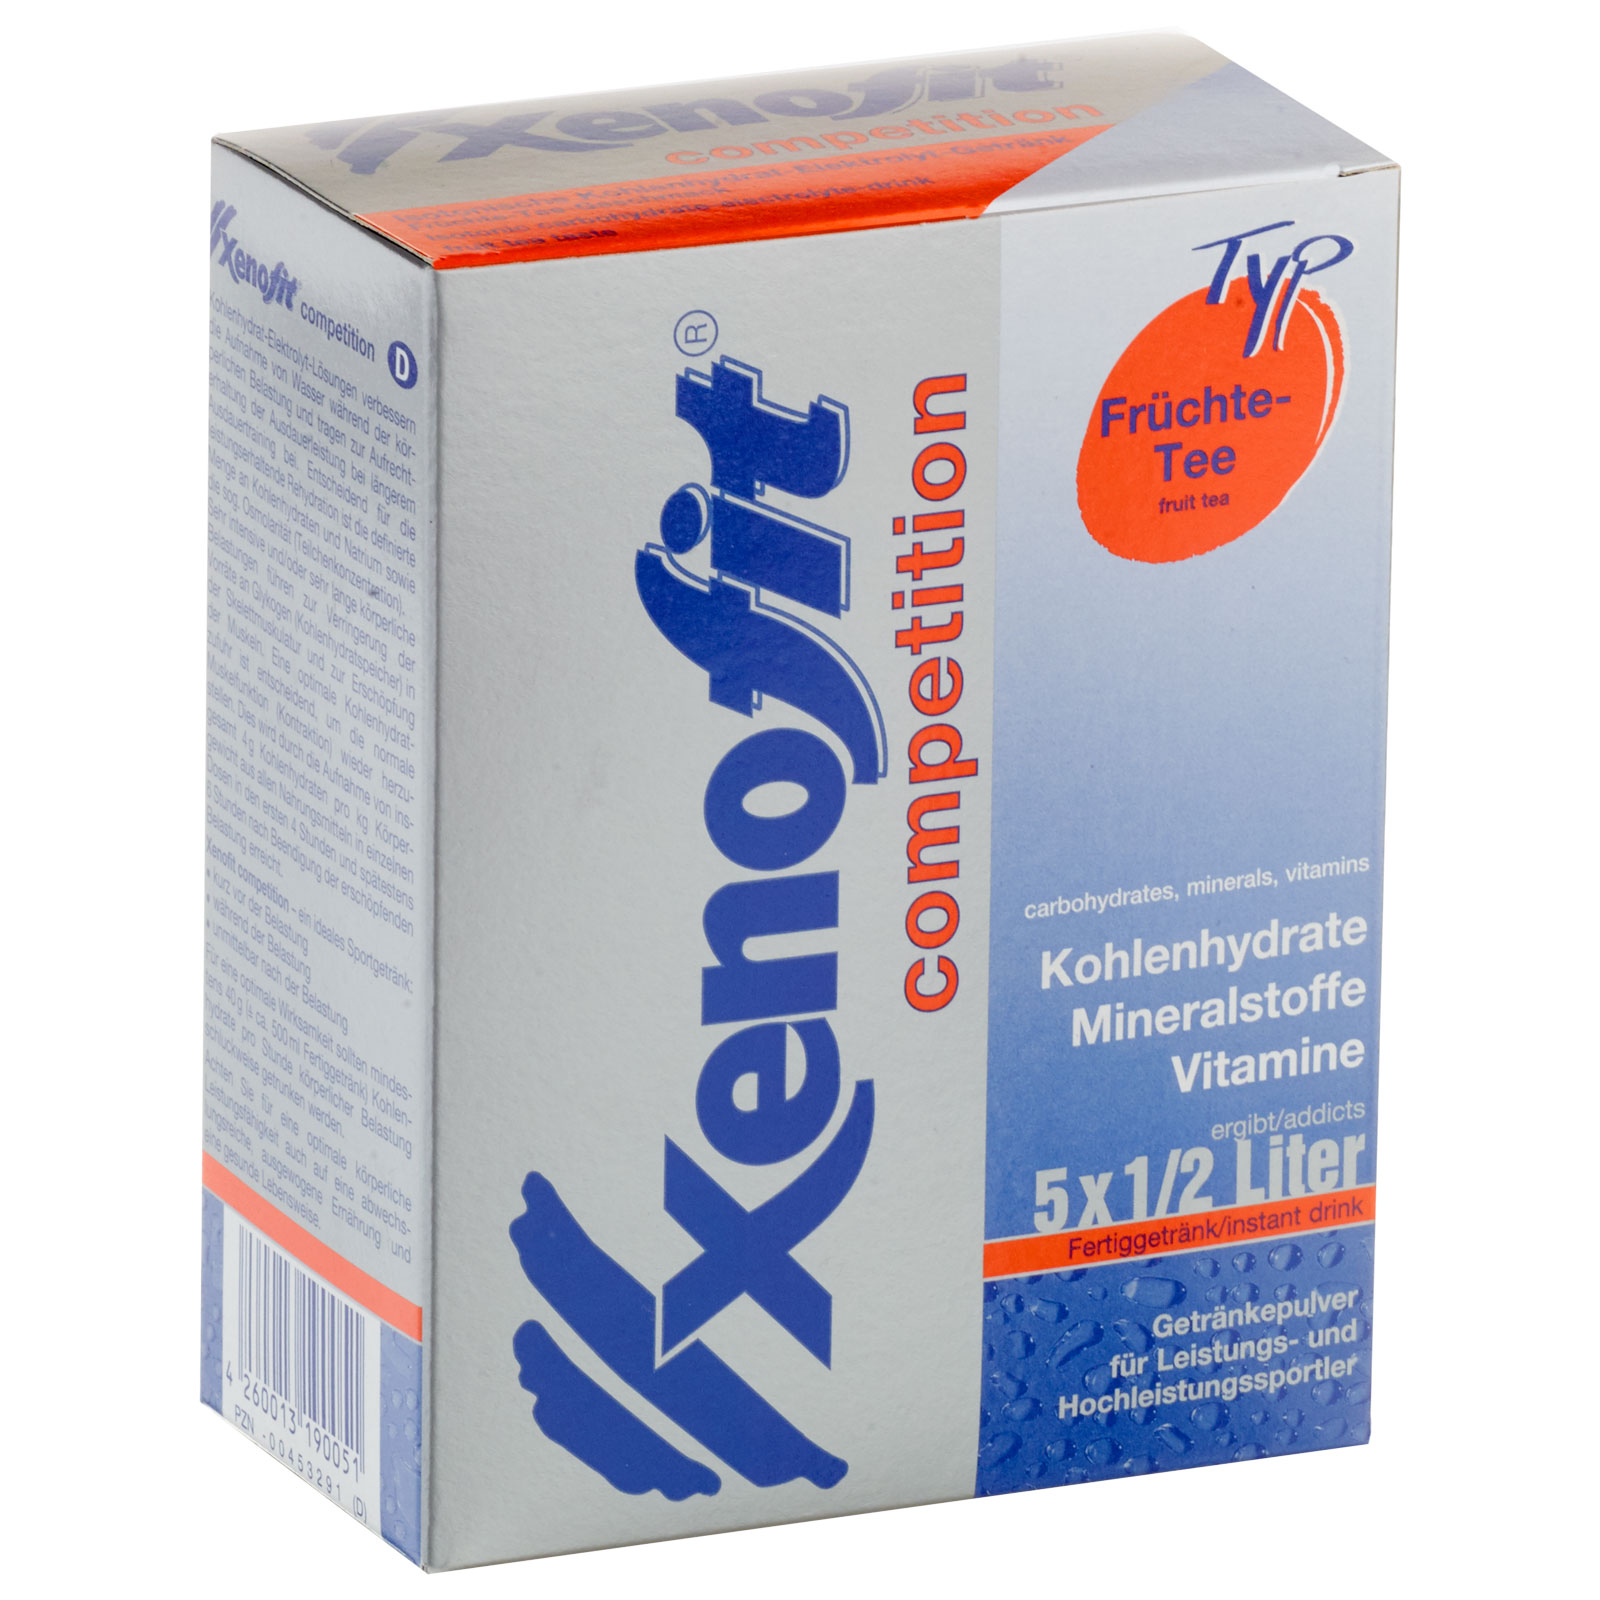 Productfoto van Xenofit Competition Fruit Tea - Isotonic Carbohydrate Drink - 5x43g